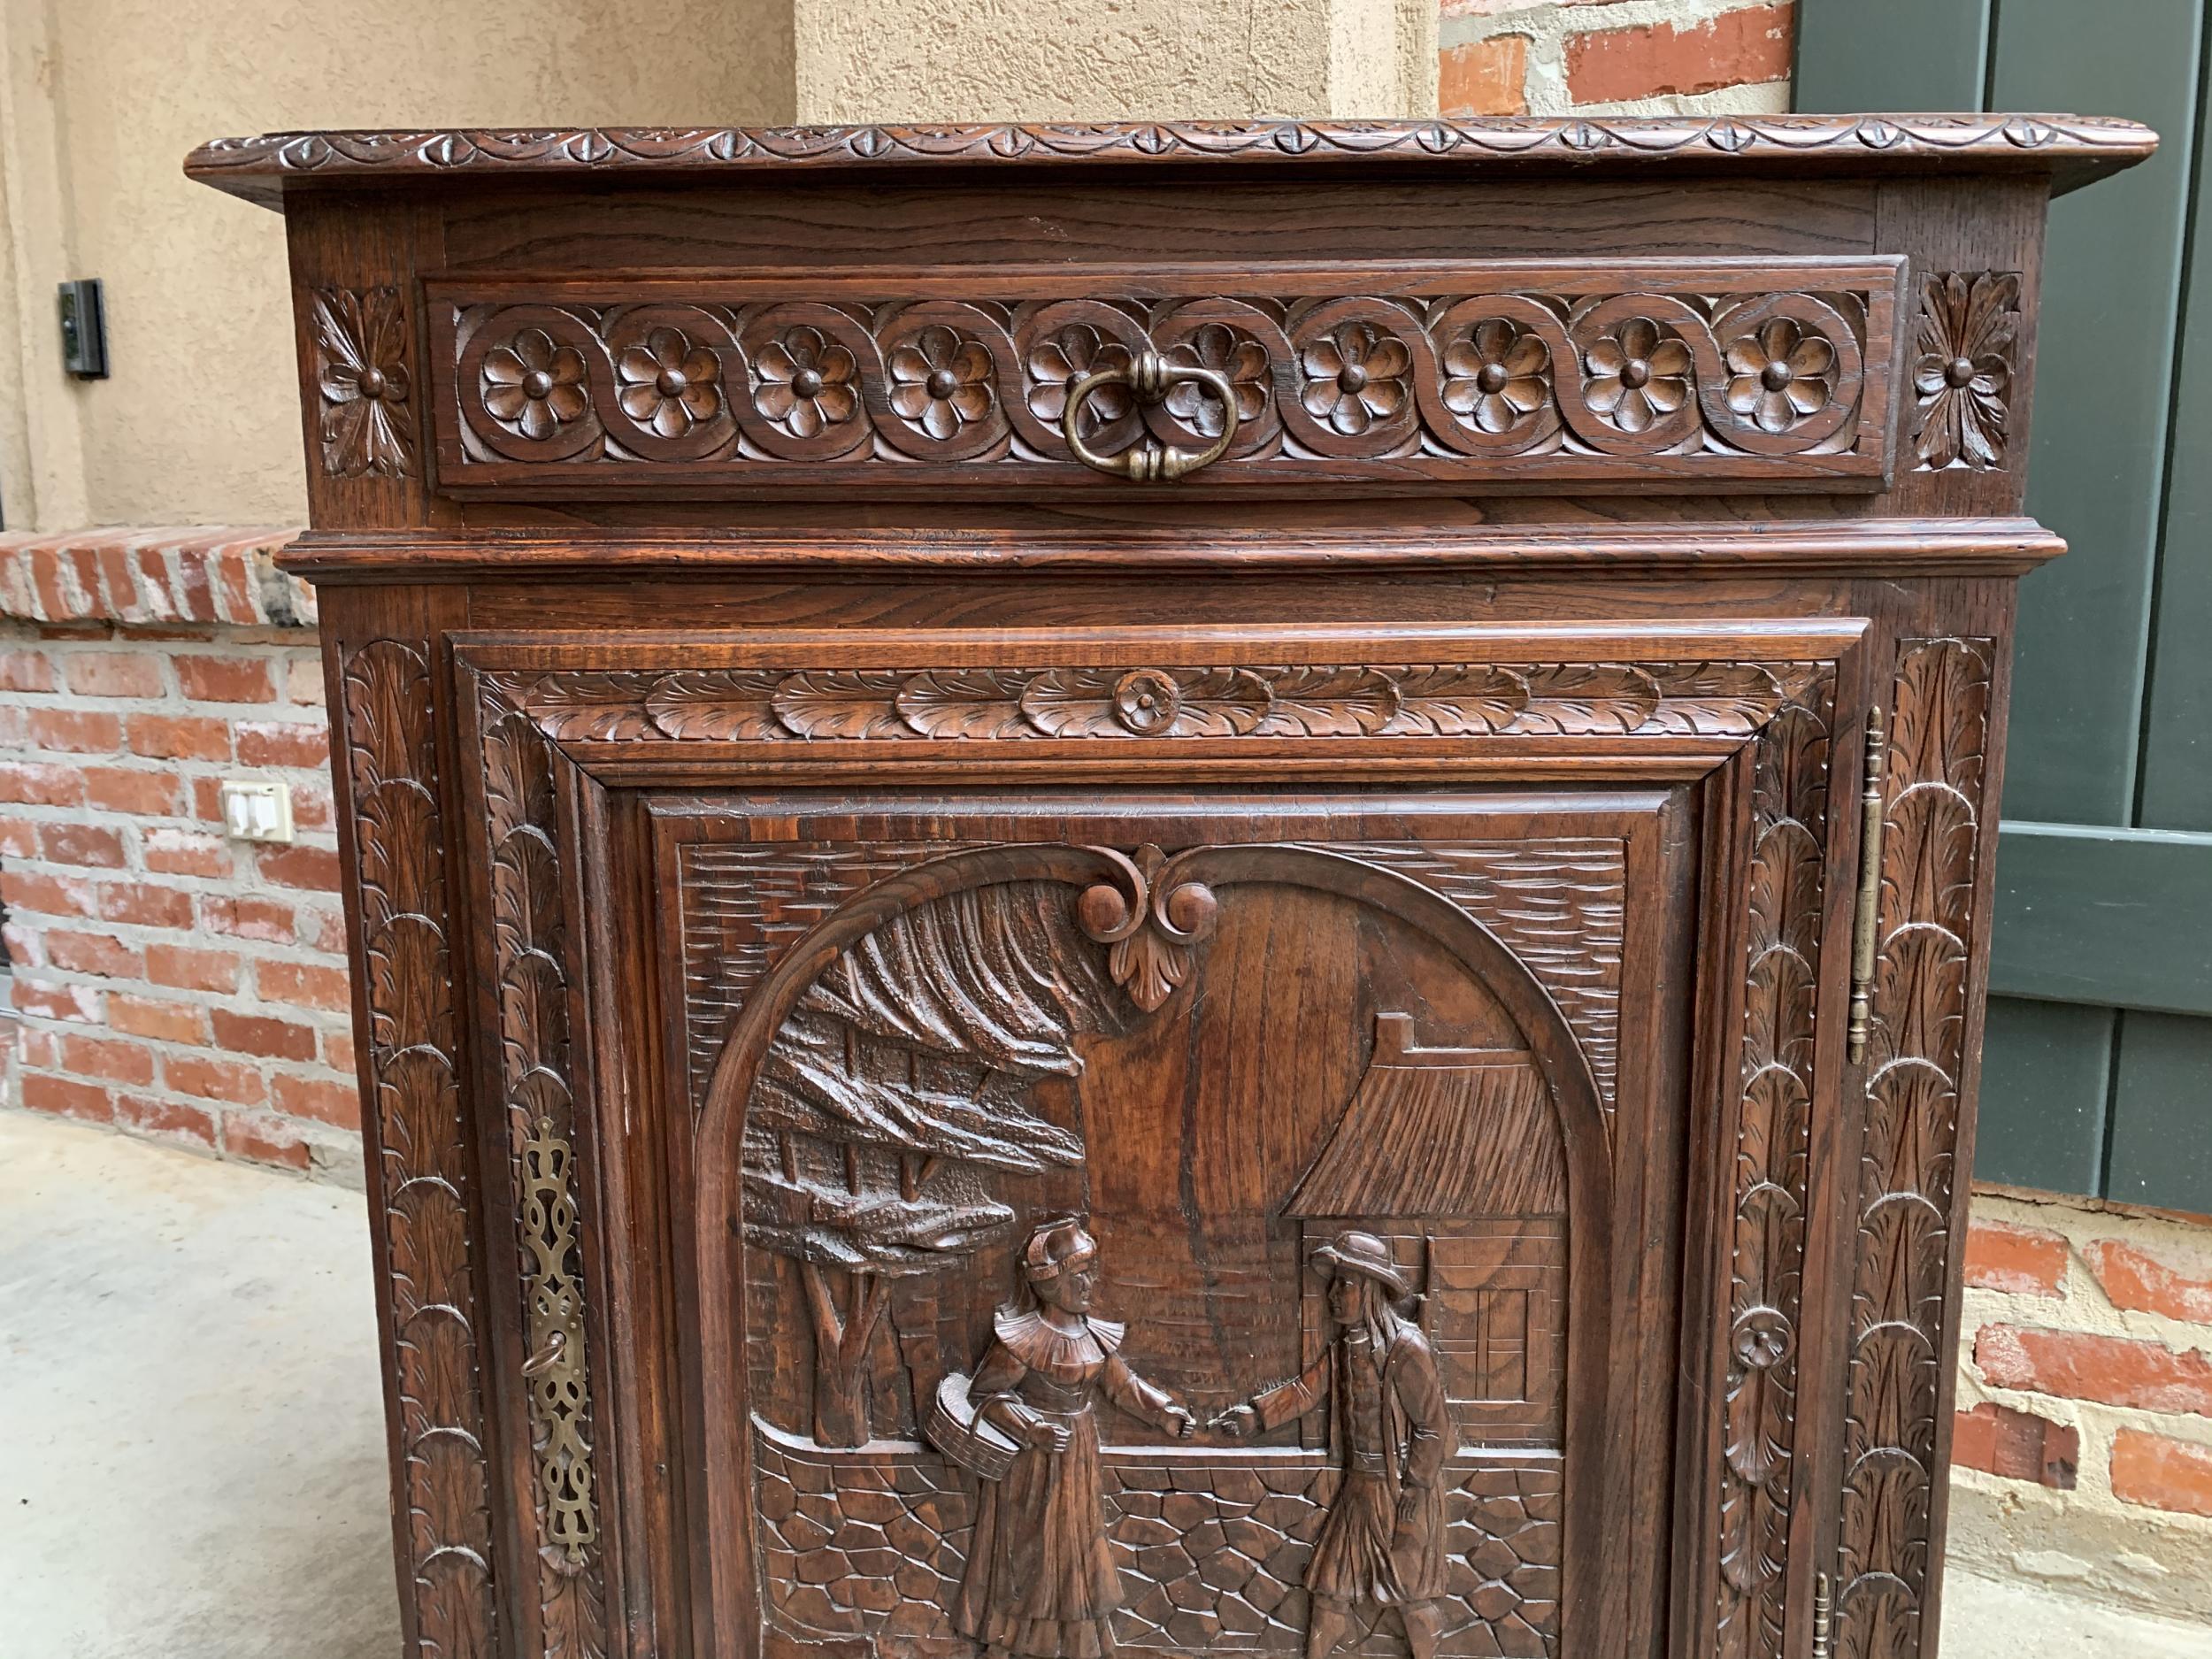 French Provincial 19th Century Antique French Carved Oak Confiturier Jam Cabinet Breton Brittany